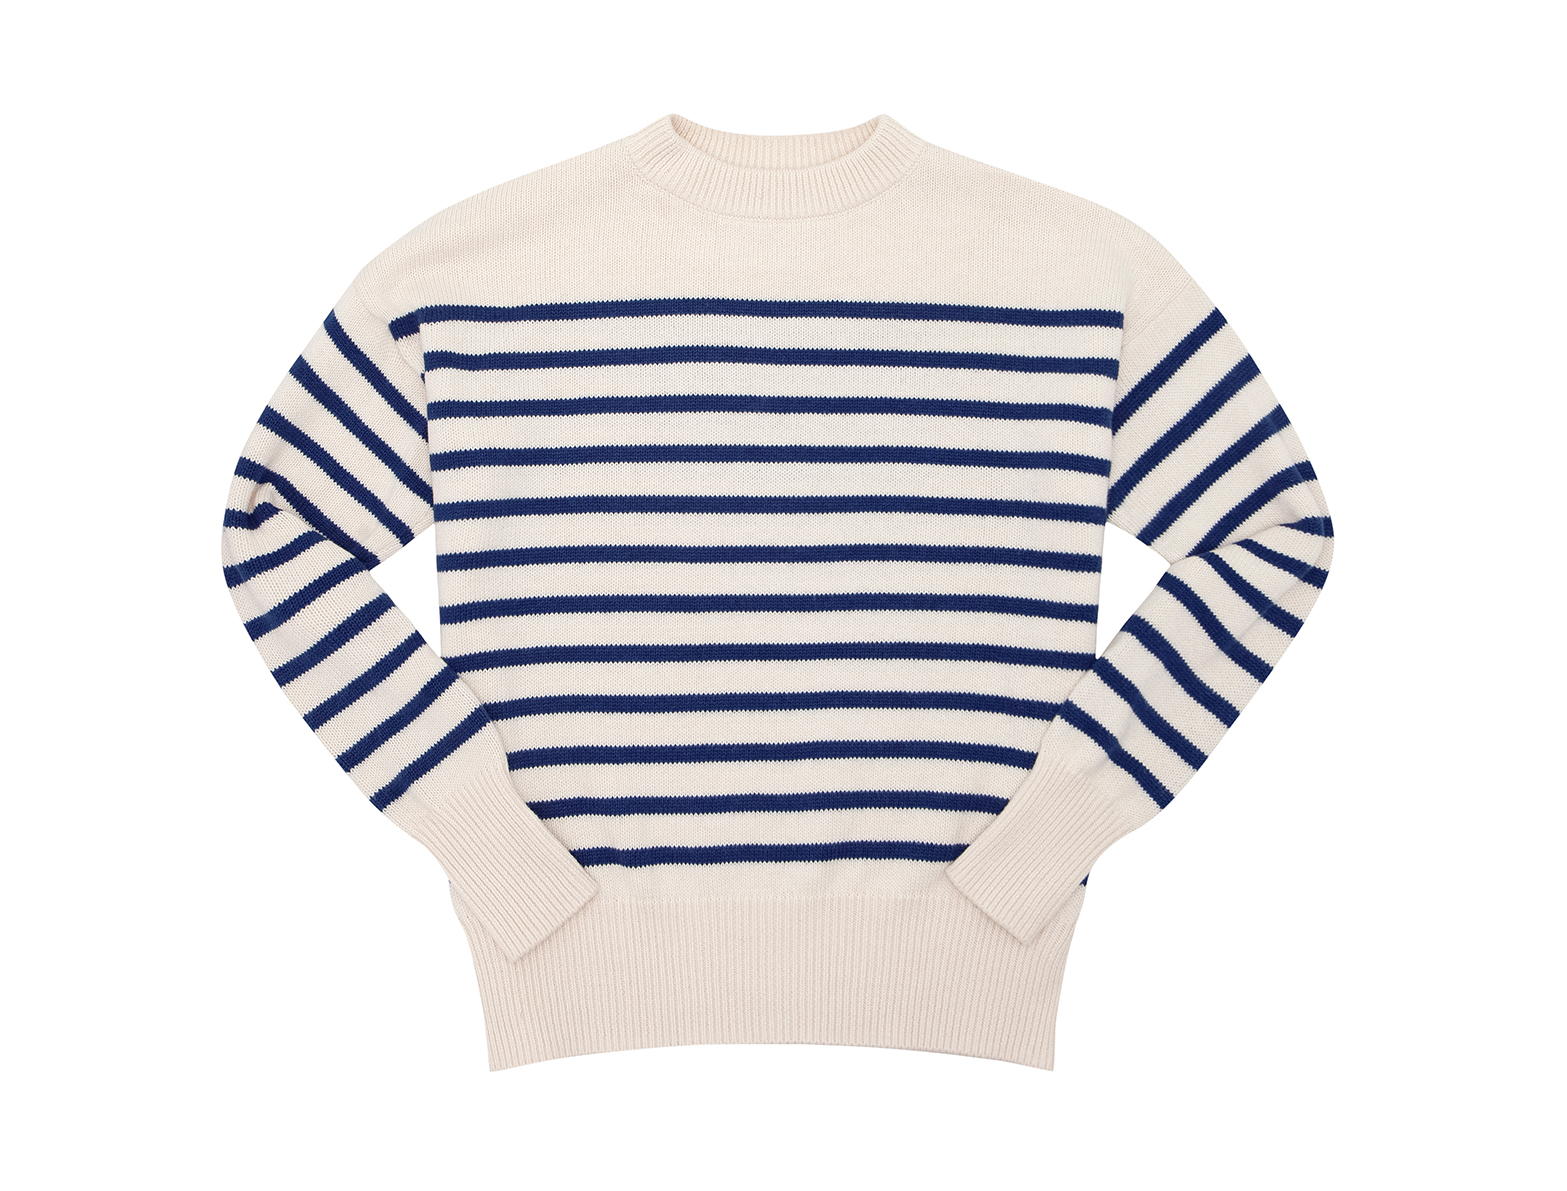 My Favorite Sweater Dresses. - The Stripe by Grace Atwood